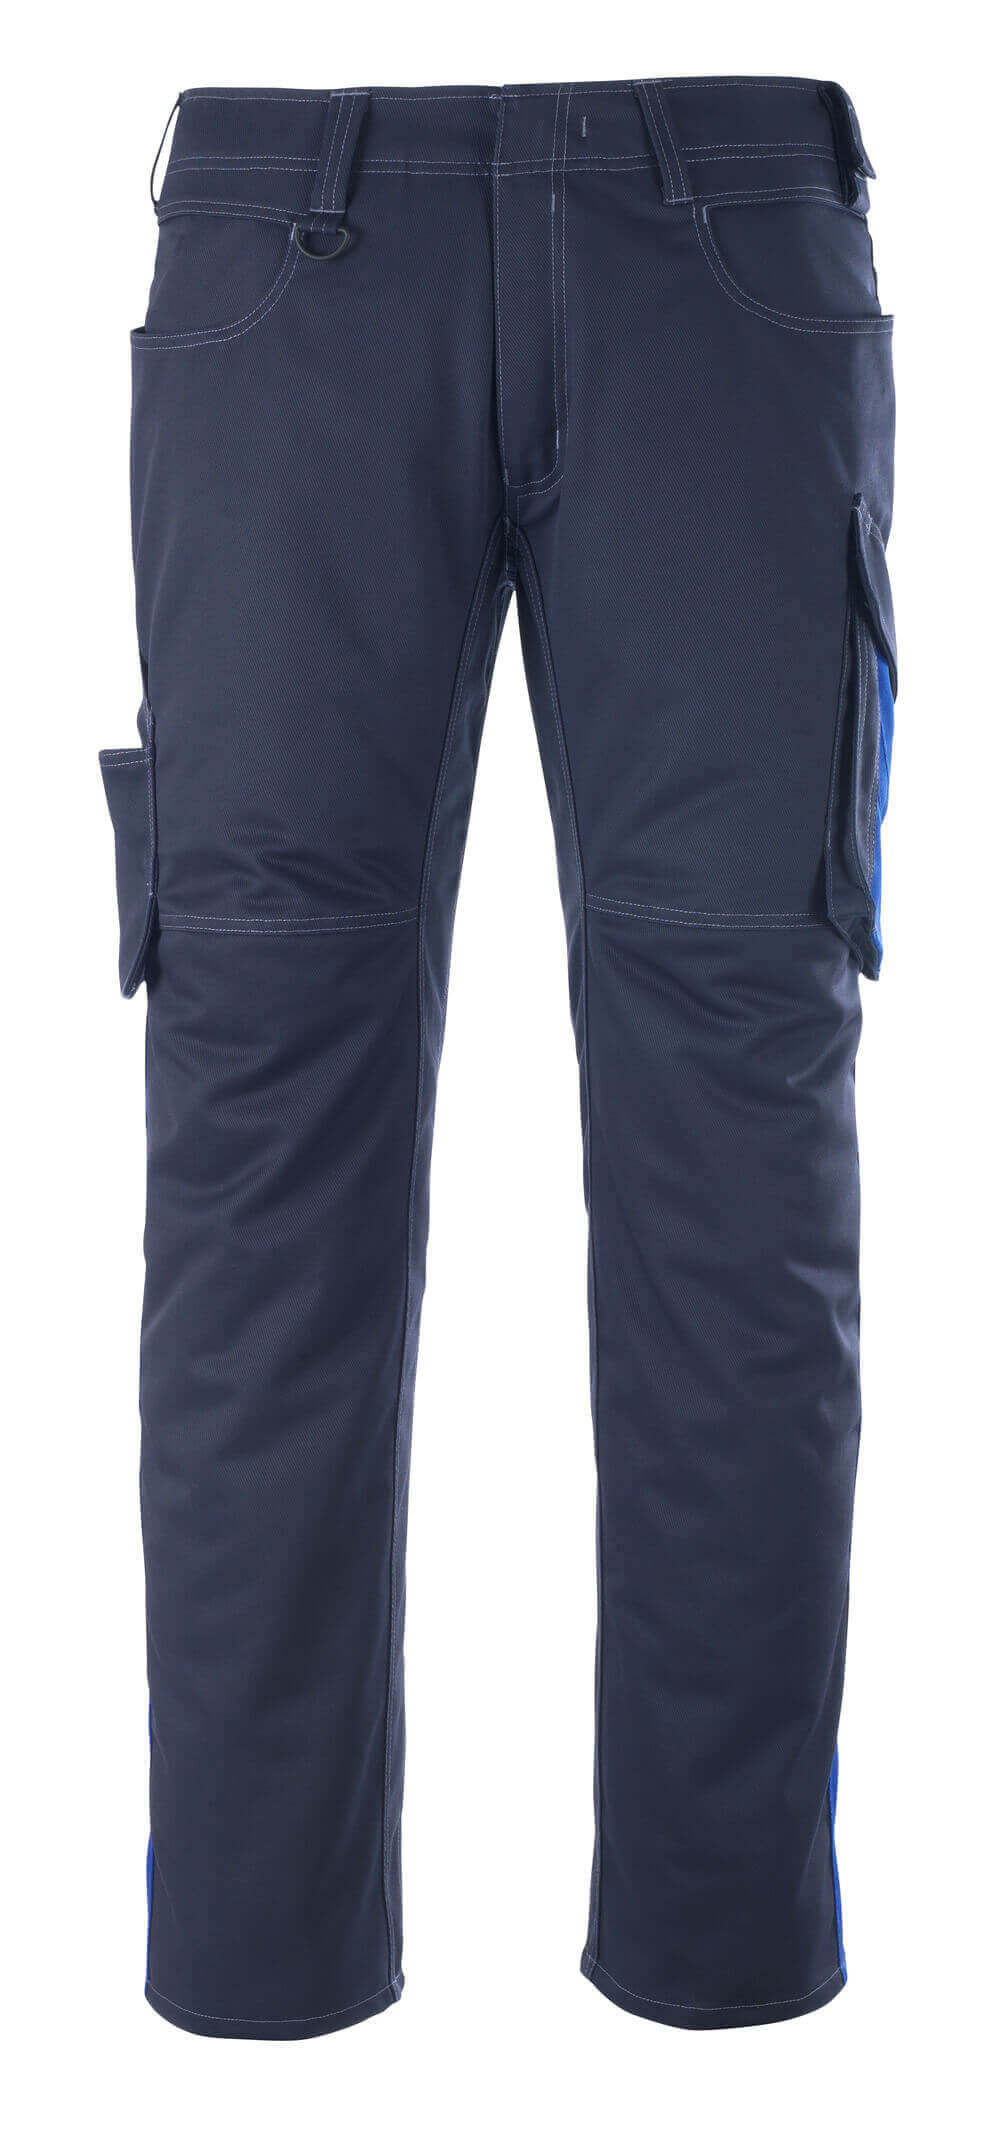 12079-203-01011 Trousers with thigh pockets - dark navy/royal